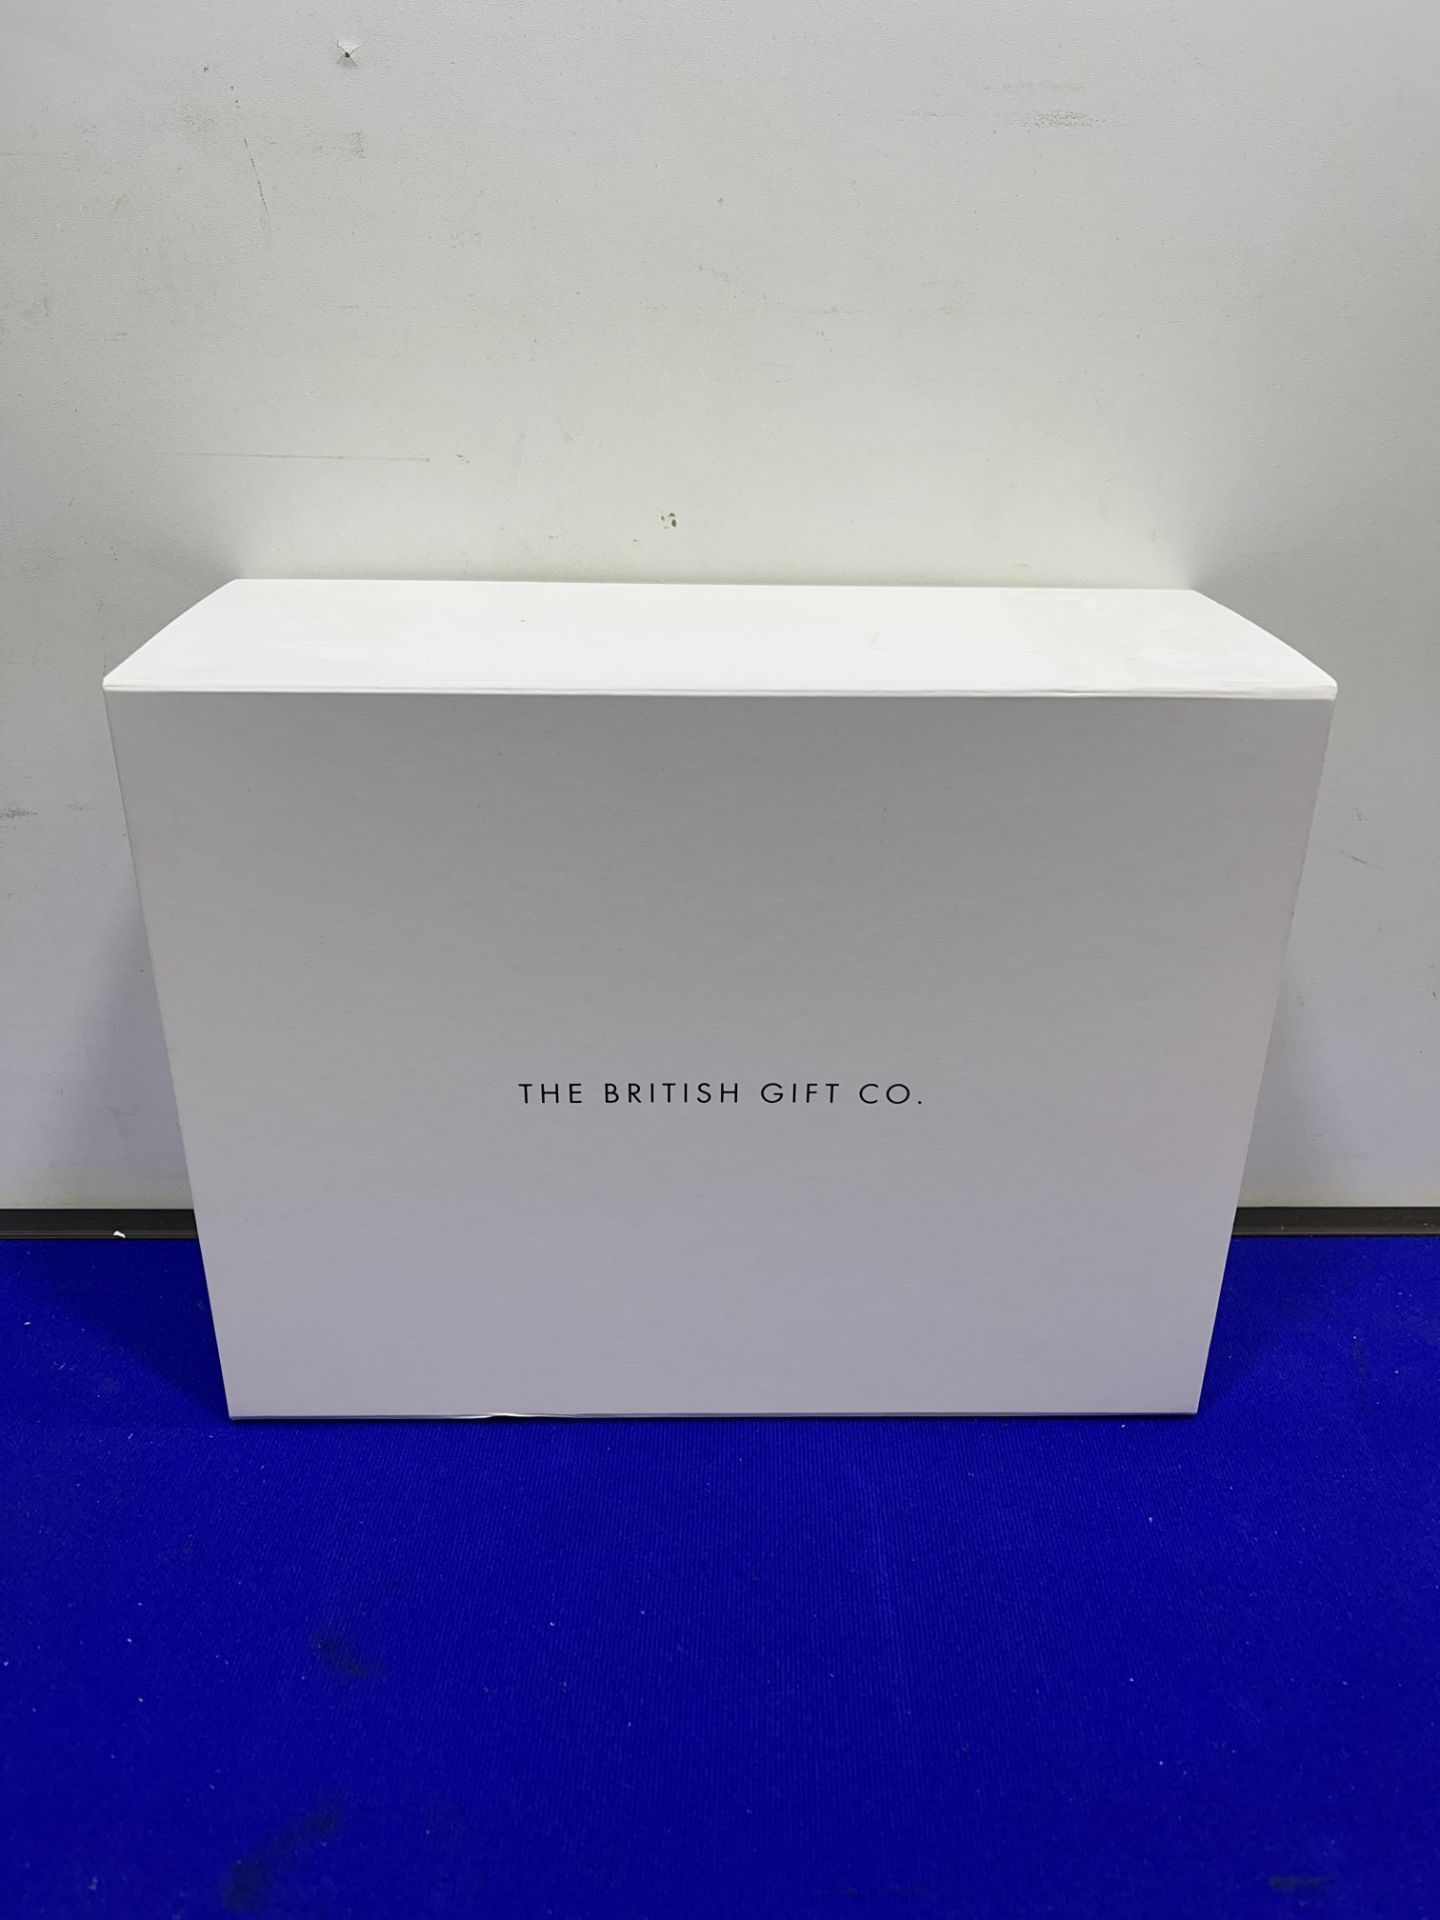 Pallet of Empty Unbranded/Branded Gift Boxes - Image 2 of 7